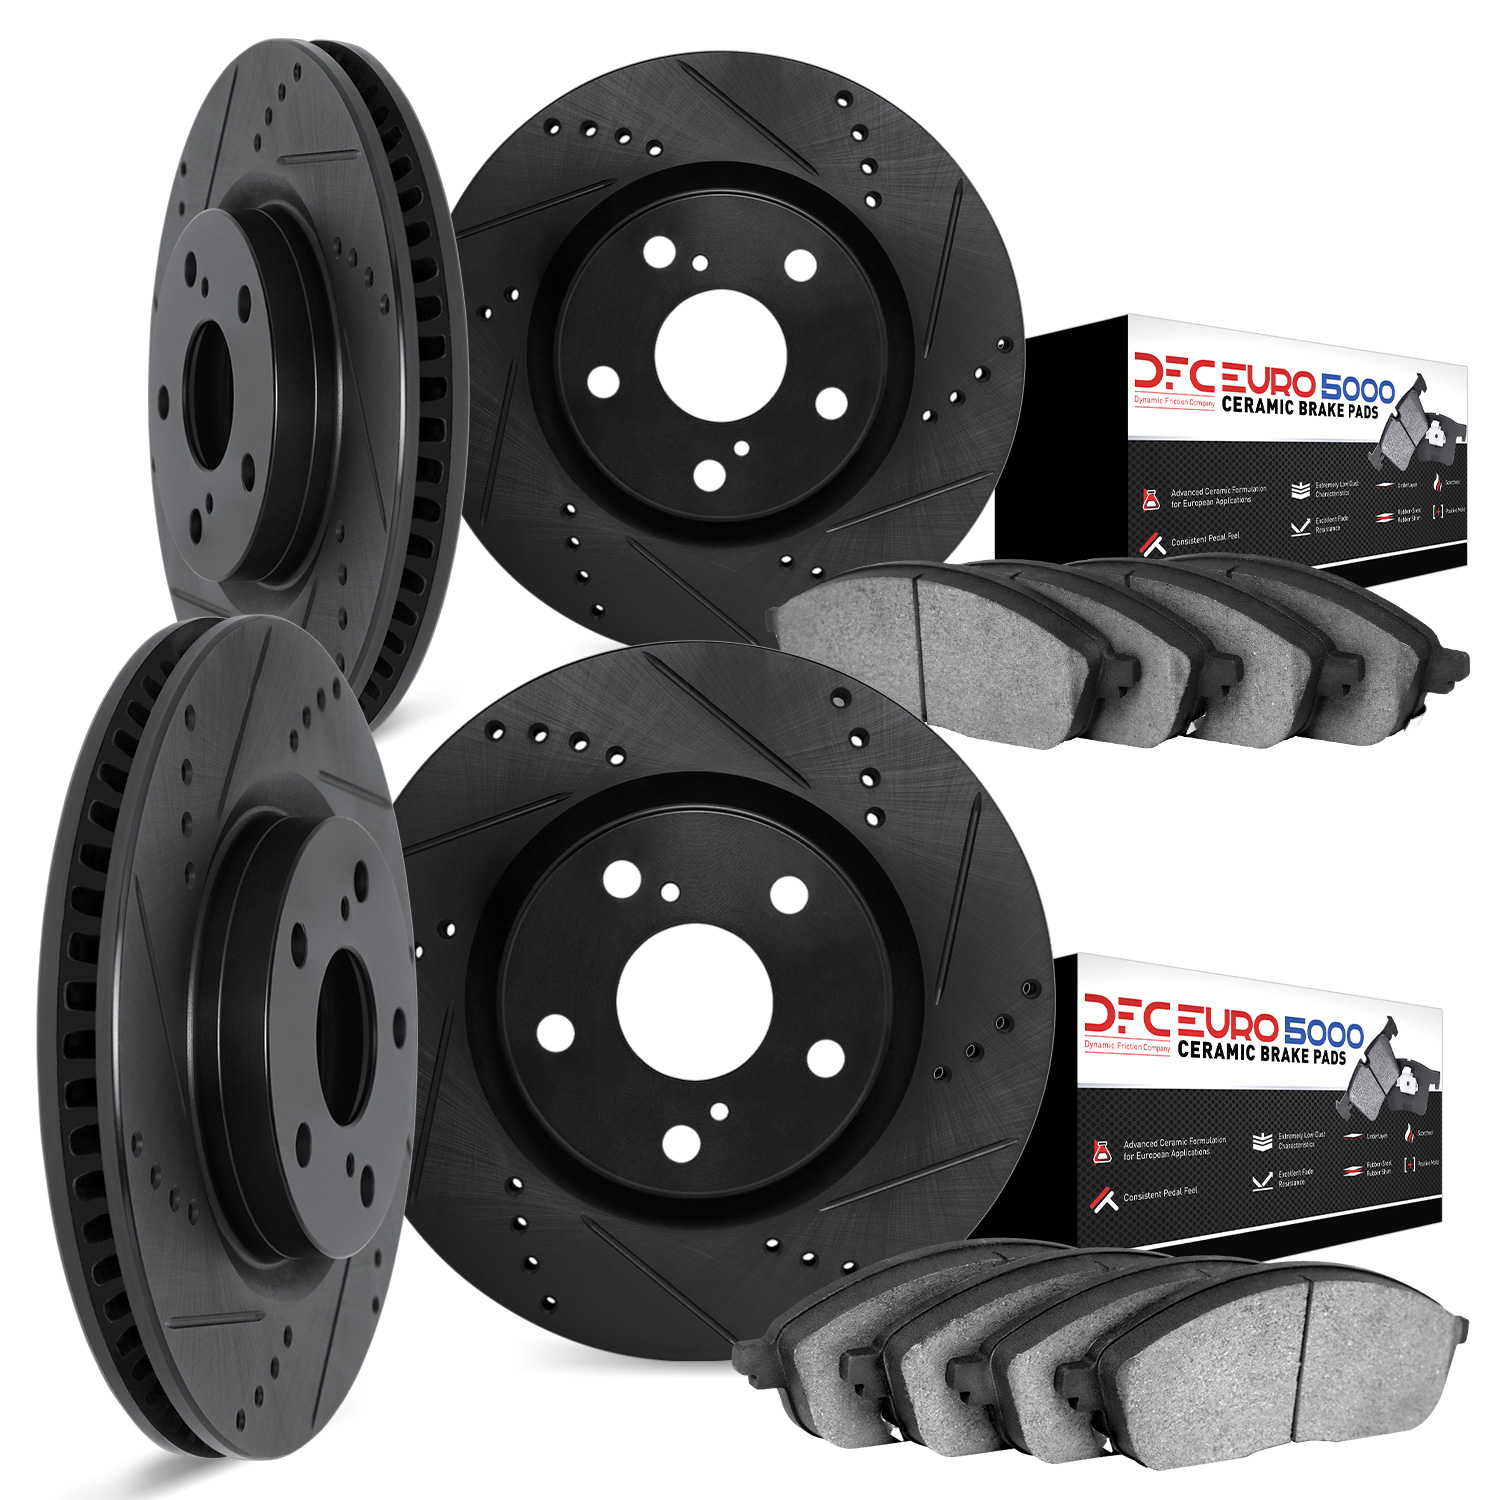 8604-31016 Drilled/Slotted Brake Rotors w/5000 Euro Ceramic Brake Pads Kit [Black], 2000-2003 BMW, Position: Front and Rear